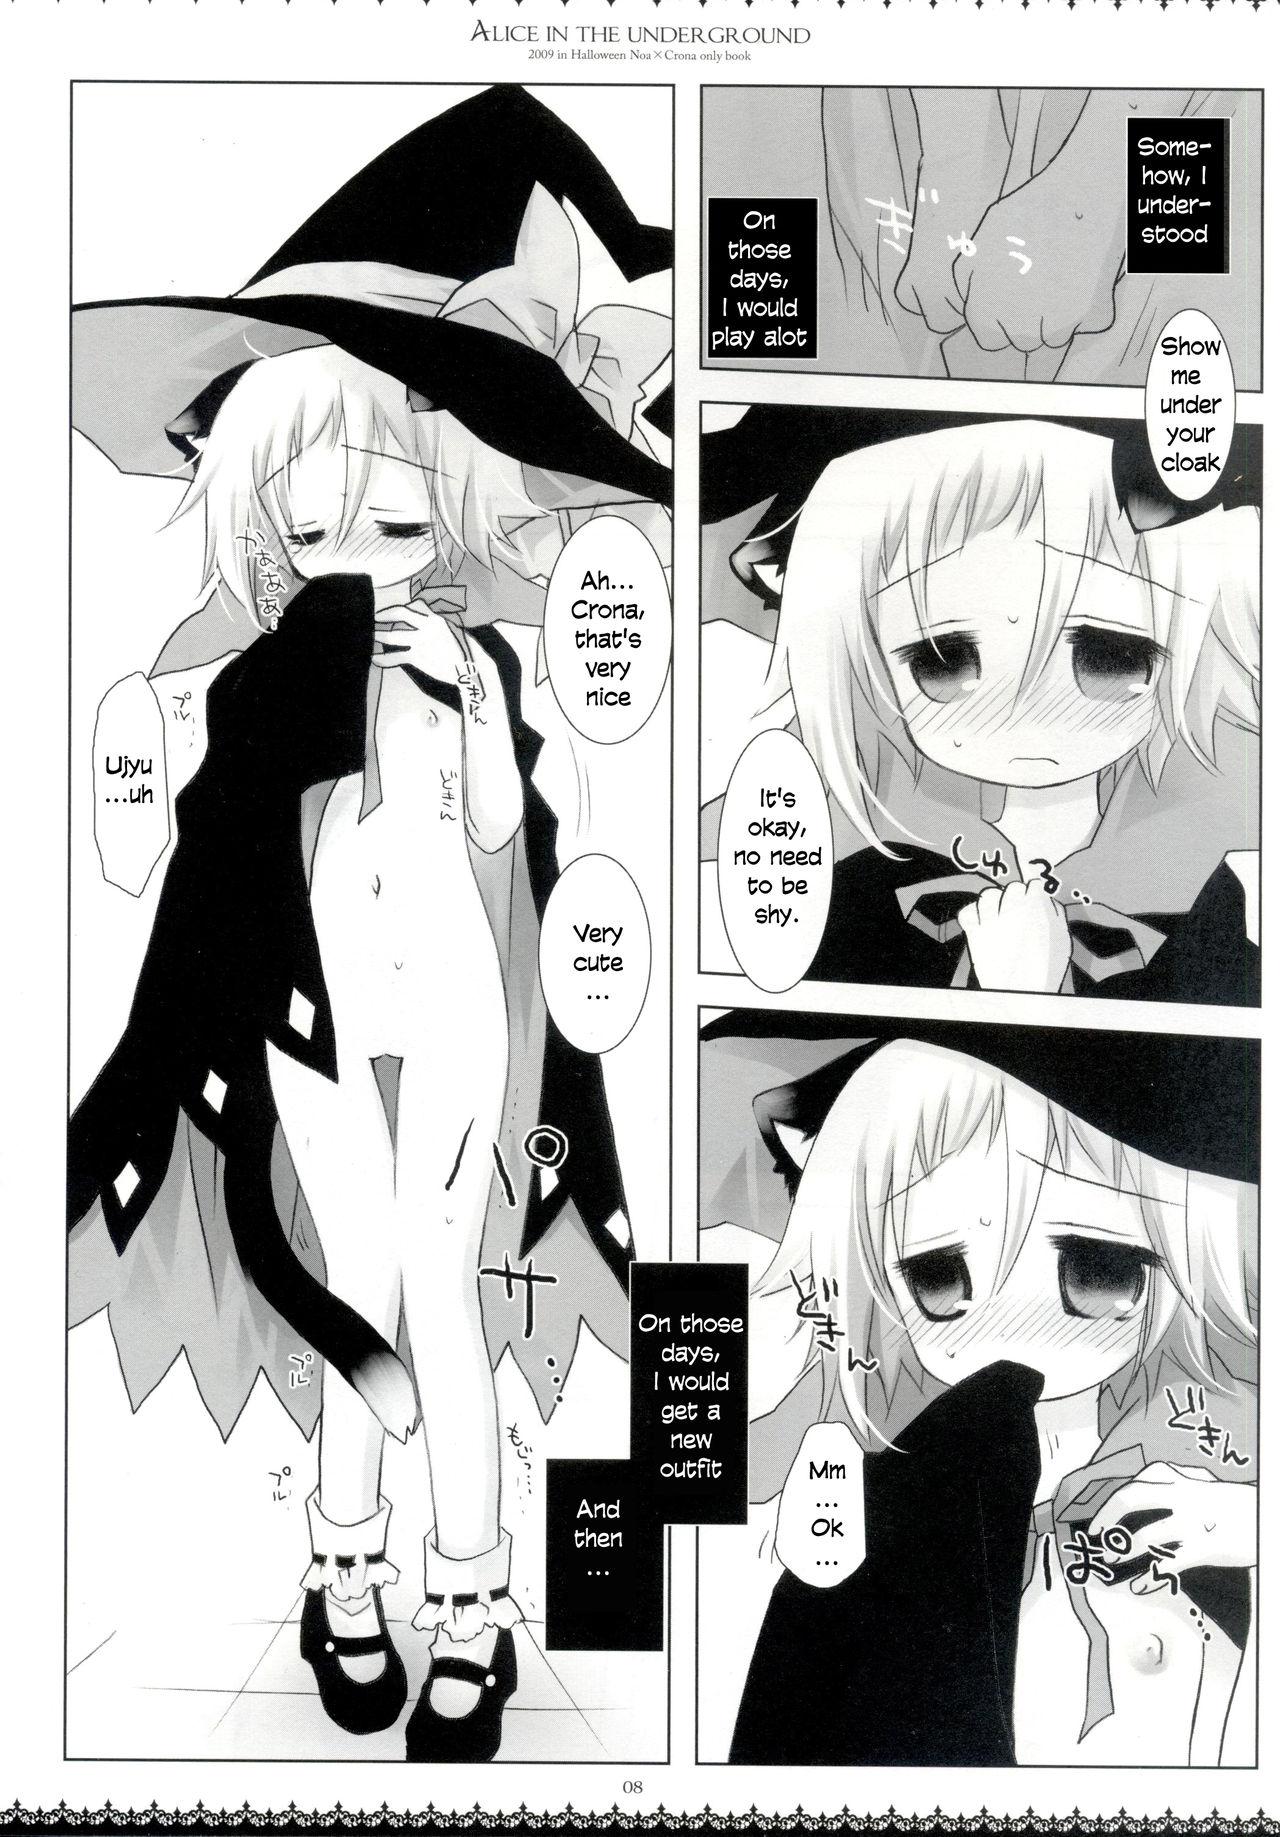 Amature Alice in the underground - Soul eater Real Amatuer Porn - Page 7